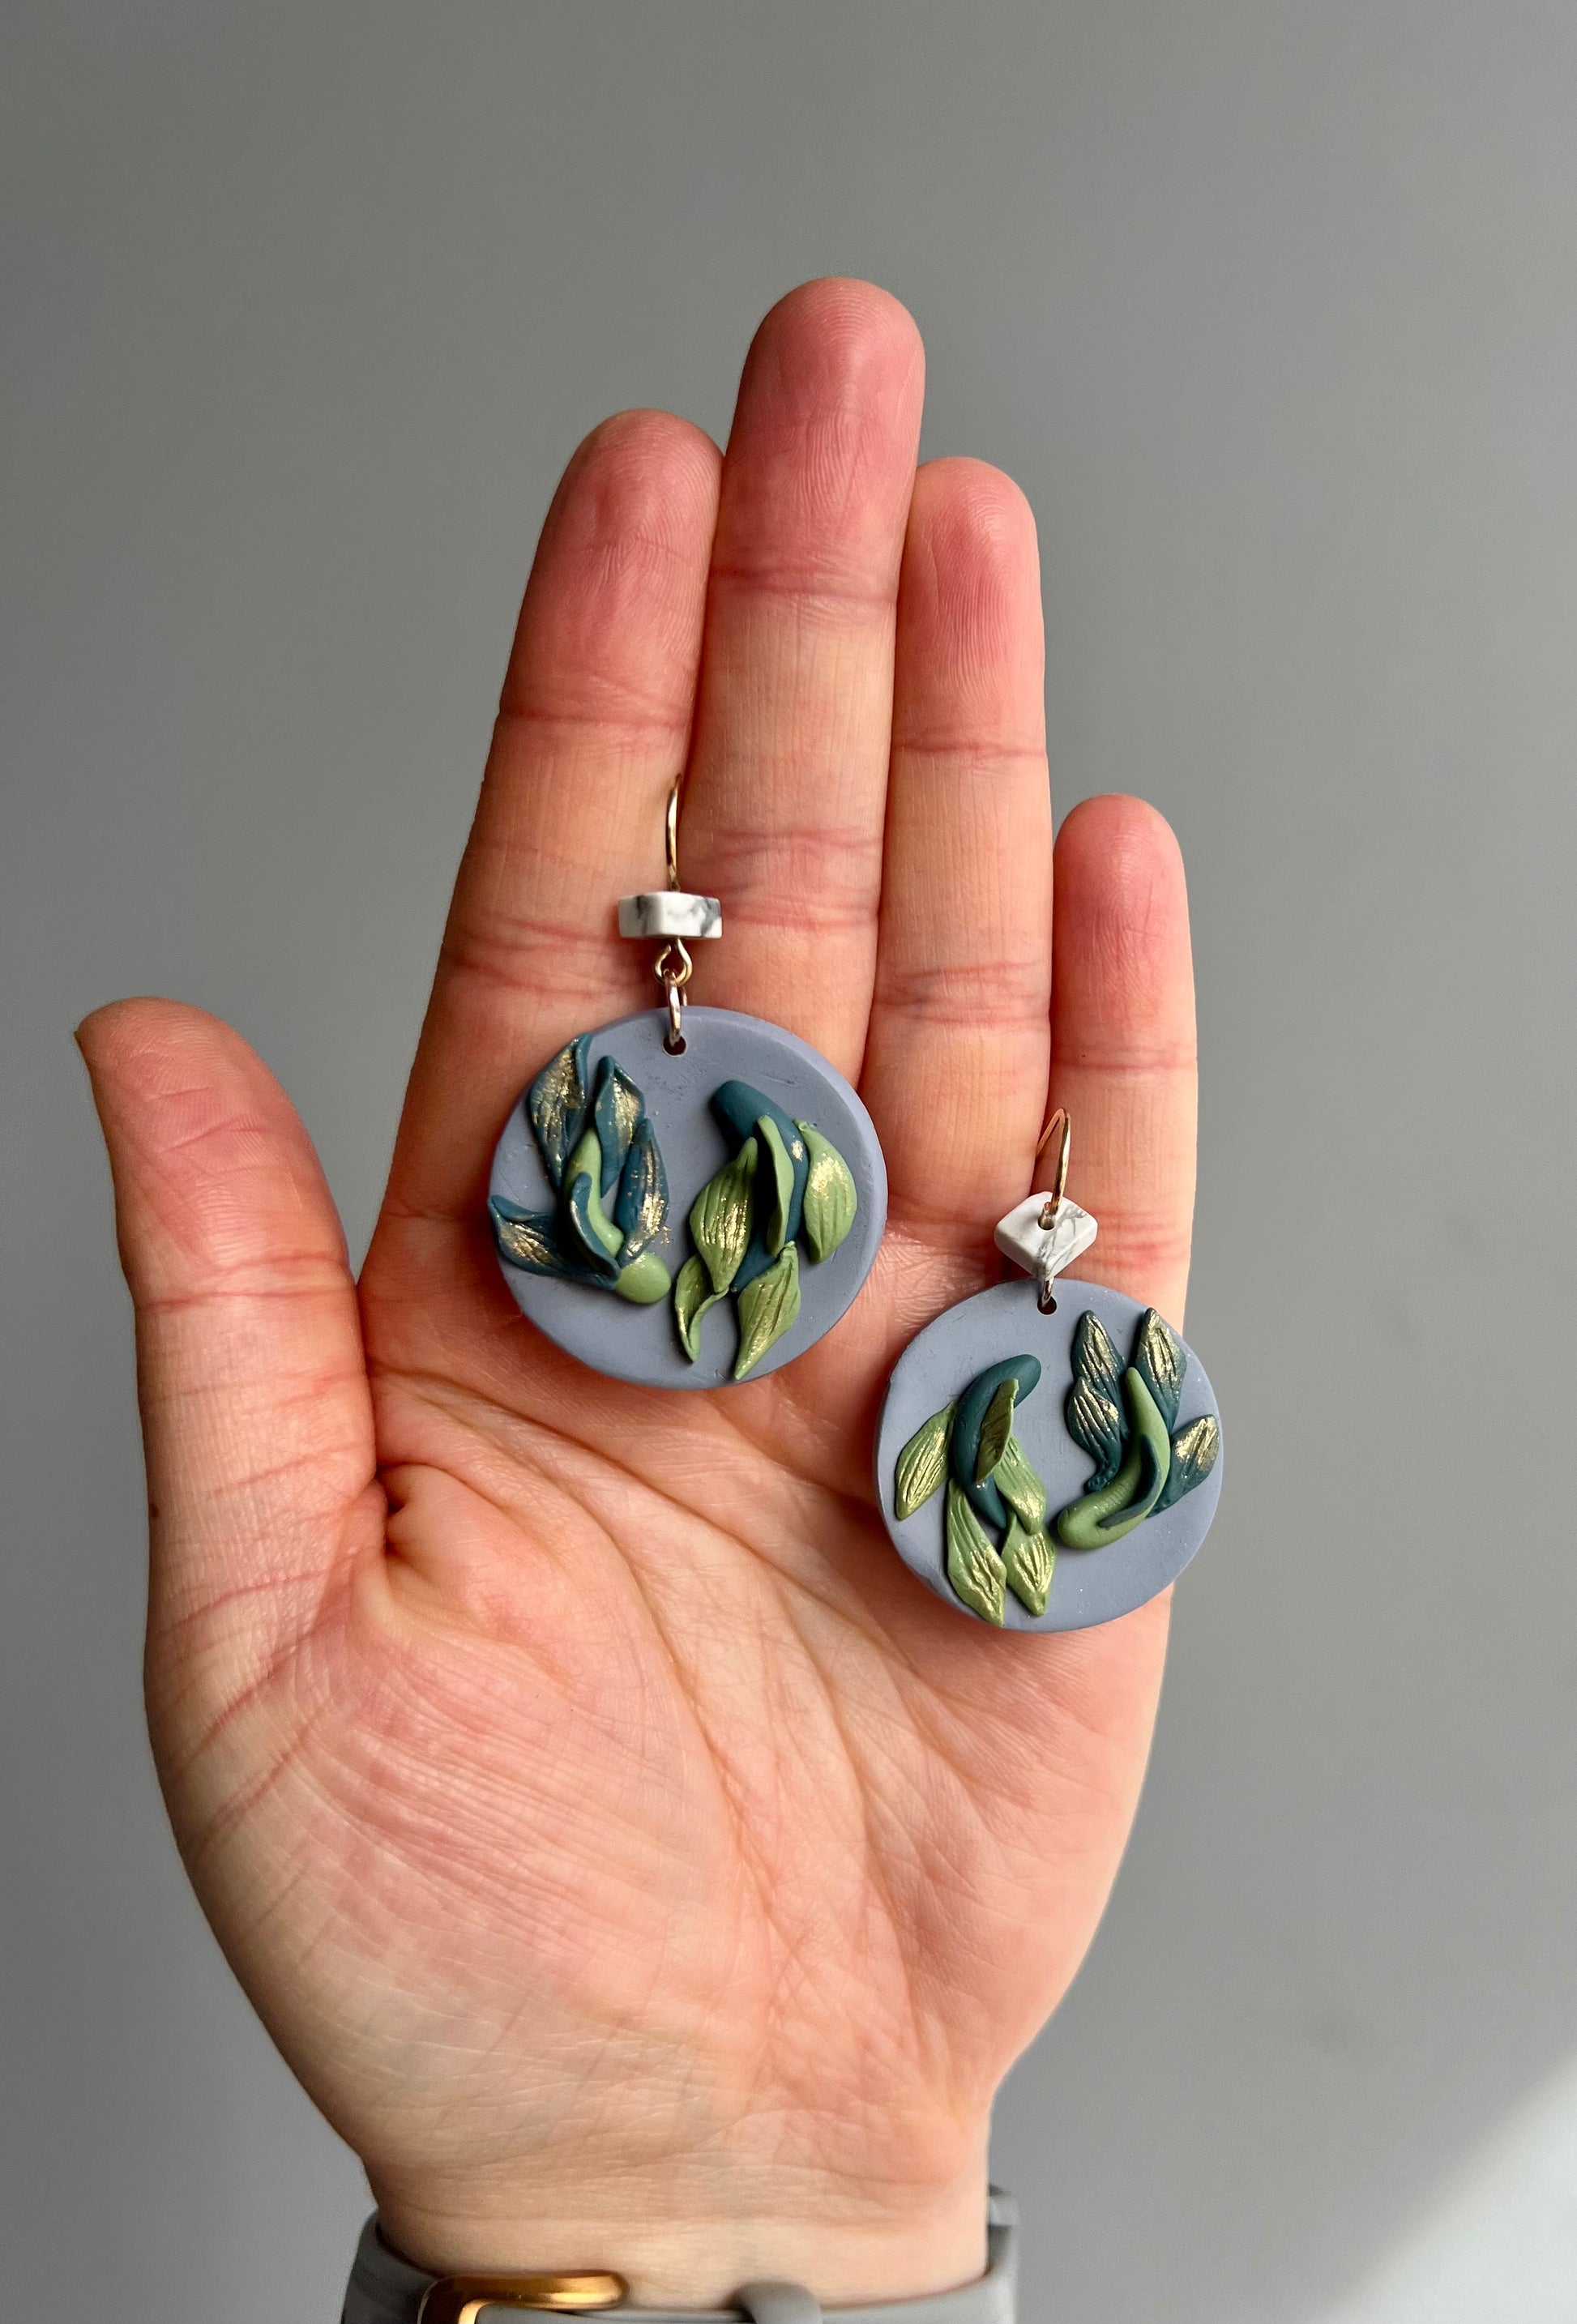 Stunning polymer clay Pisces earrings featuring exquisite Howlite accents. Handcrafted with care, these earrings embody the fluidity and intuition of the Piscean spirit. Elevate your style with this unique blend of artistry and gemstone energy. Shop now and embrace your Pisces identity!